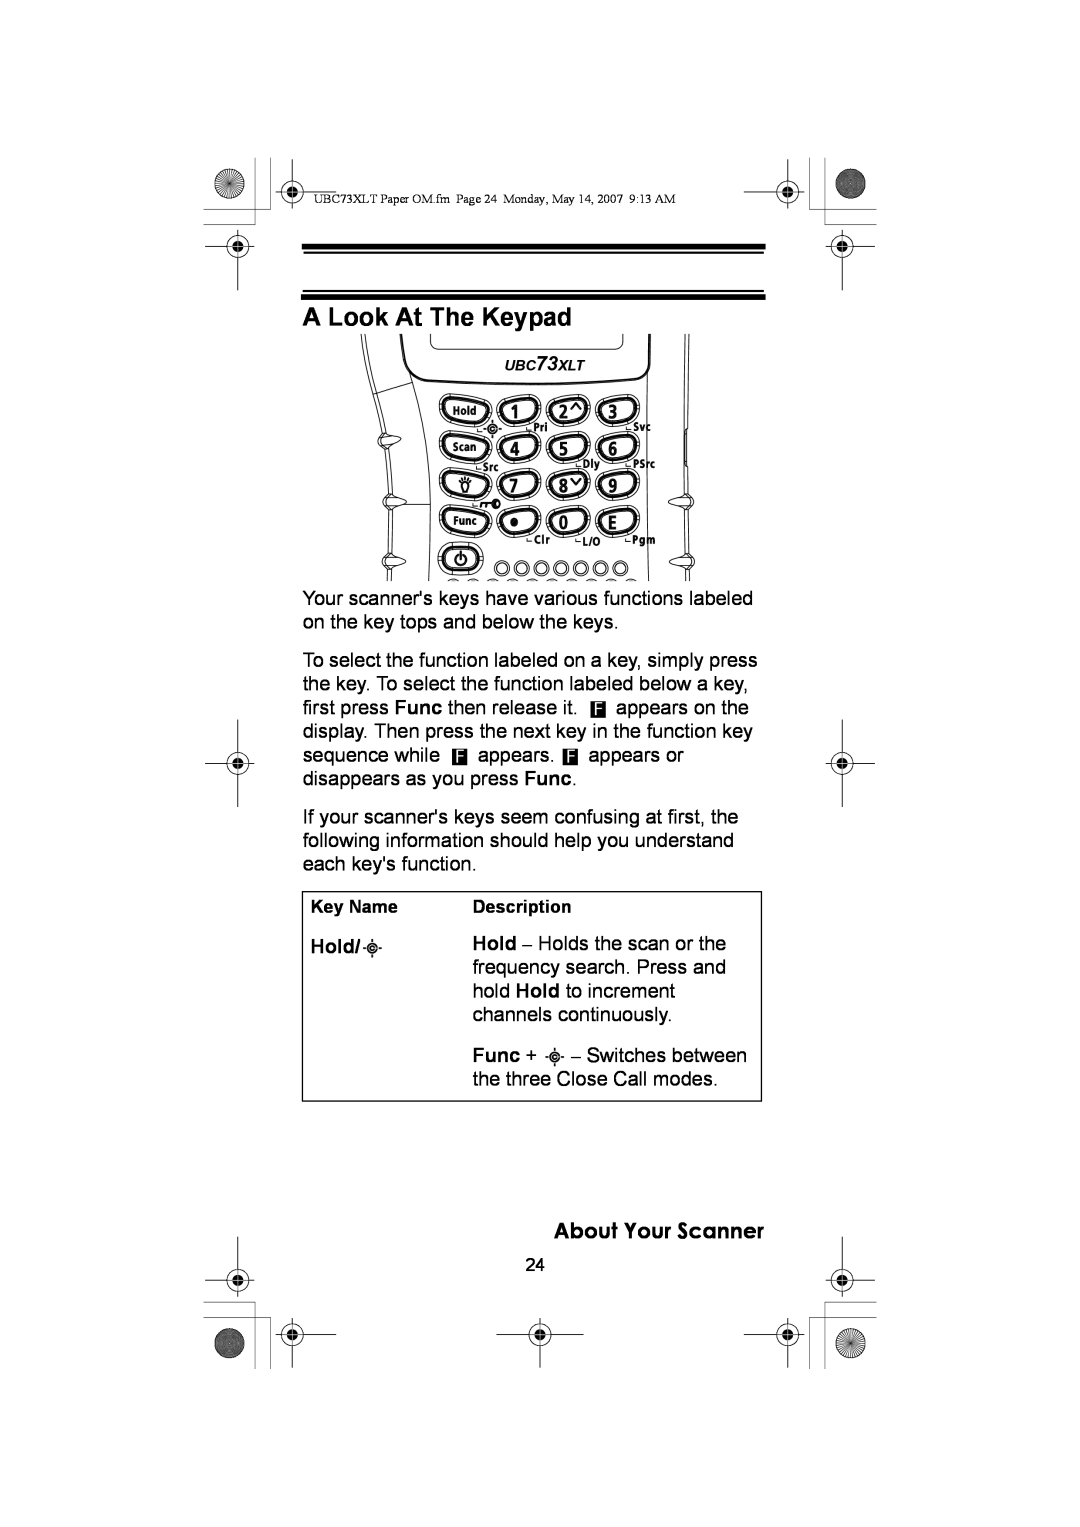 Uniden UBC73XLT owner manual A Look At The Keypad, Hold, About Your Scanner 